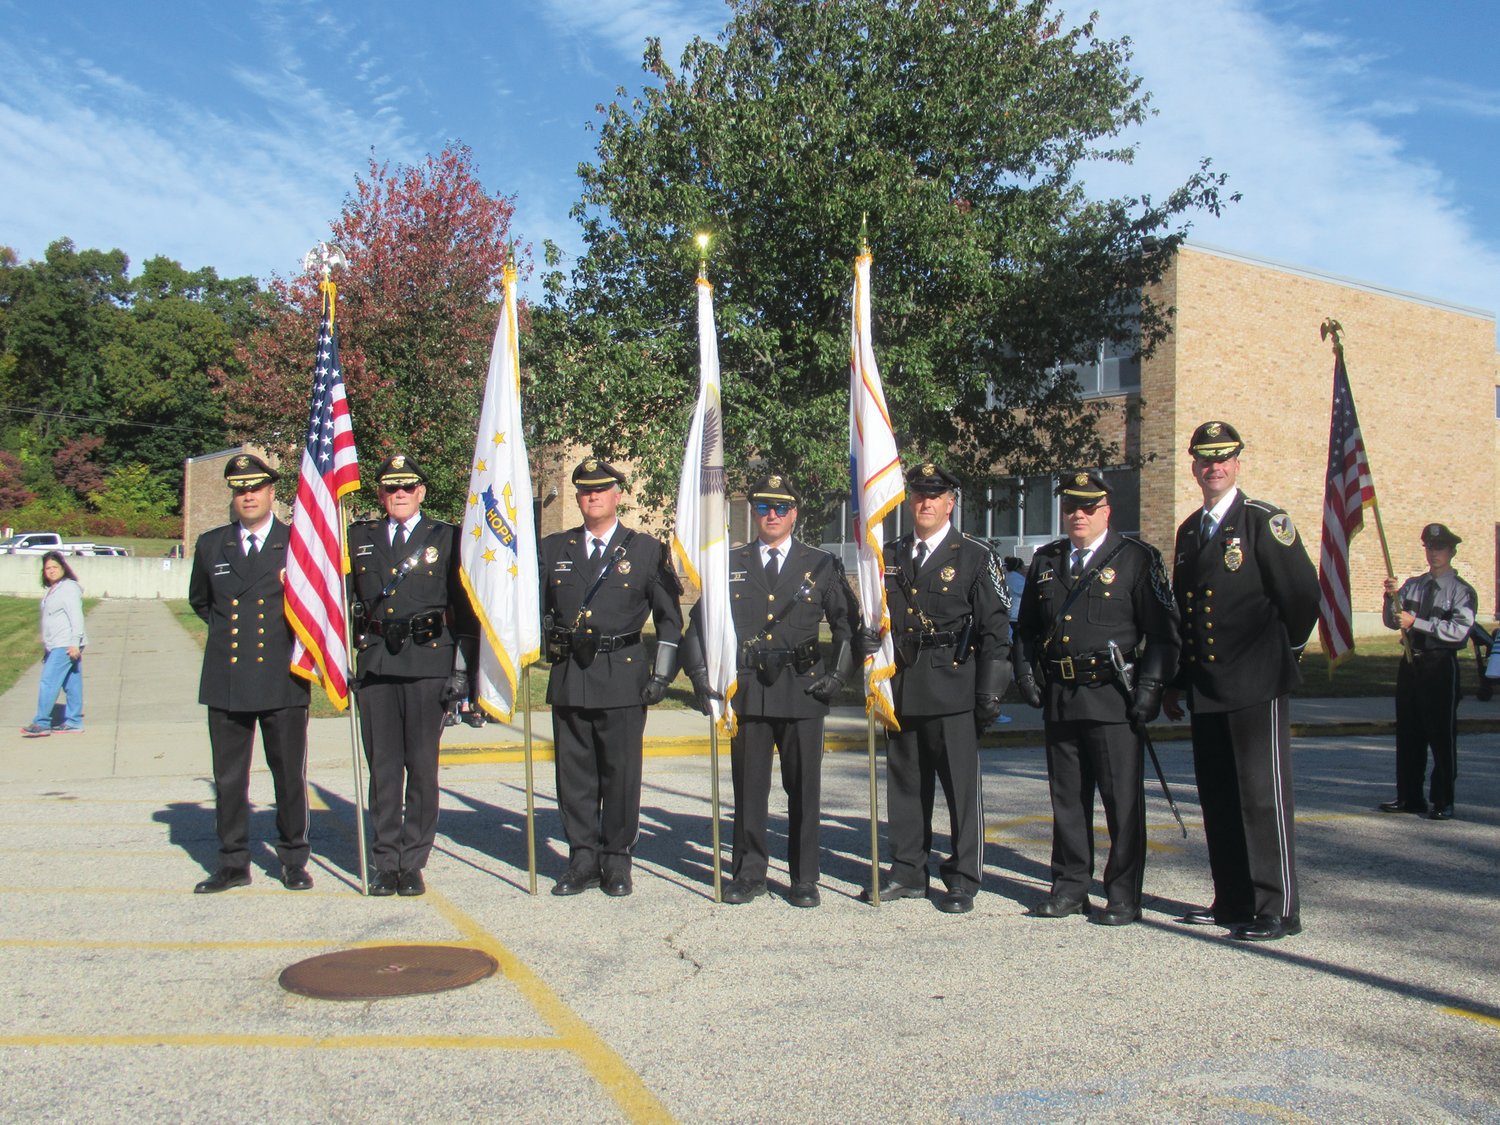 The Johnston Police and its precision color guard continued its long-standing tradition of leading the 2021 JHS Homecoming Parade that this year drew record numbers of spectators.